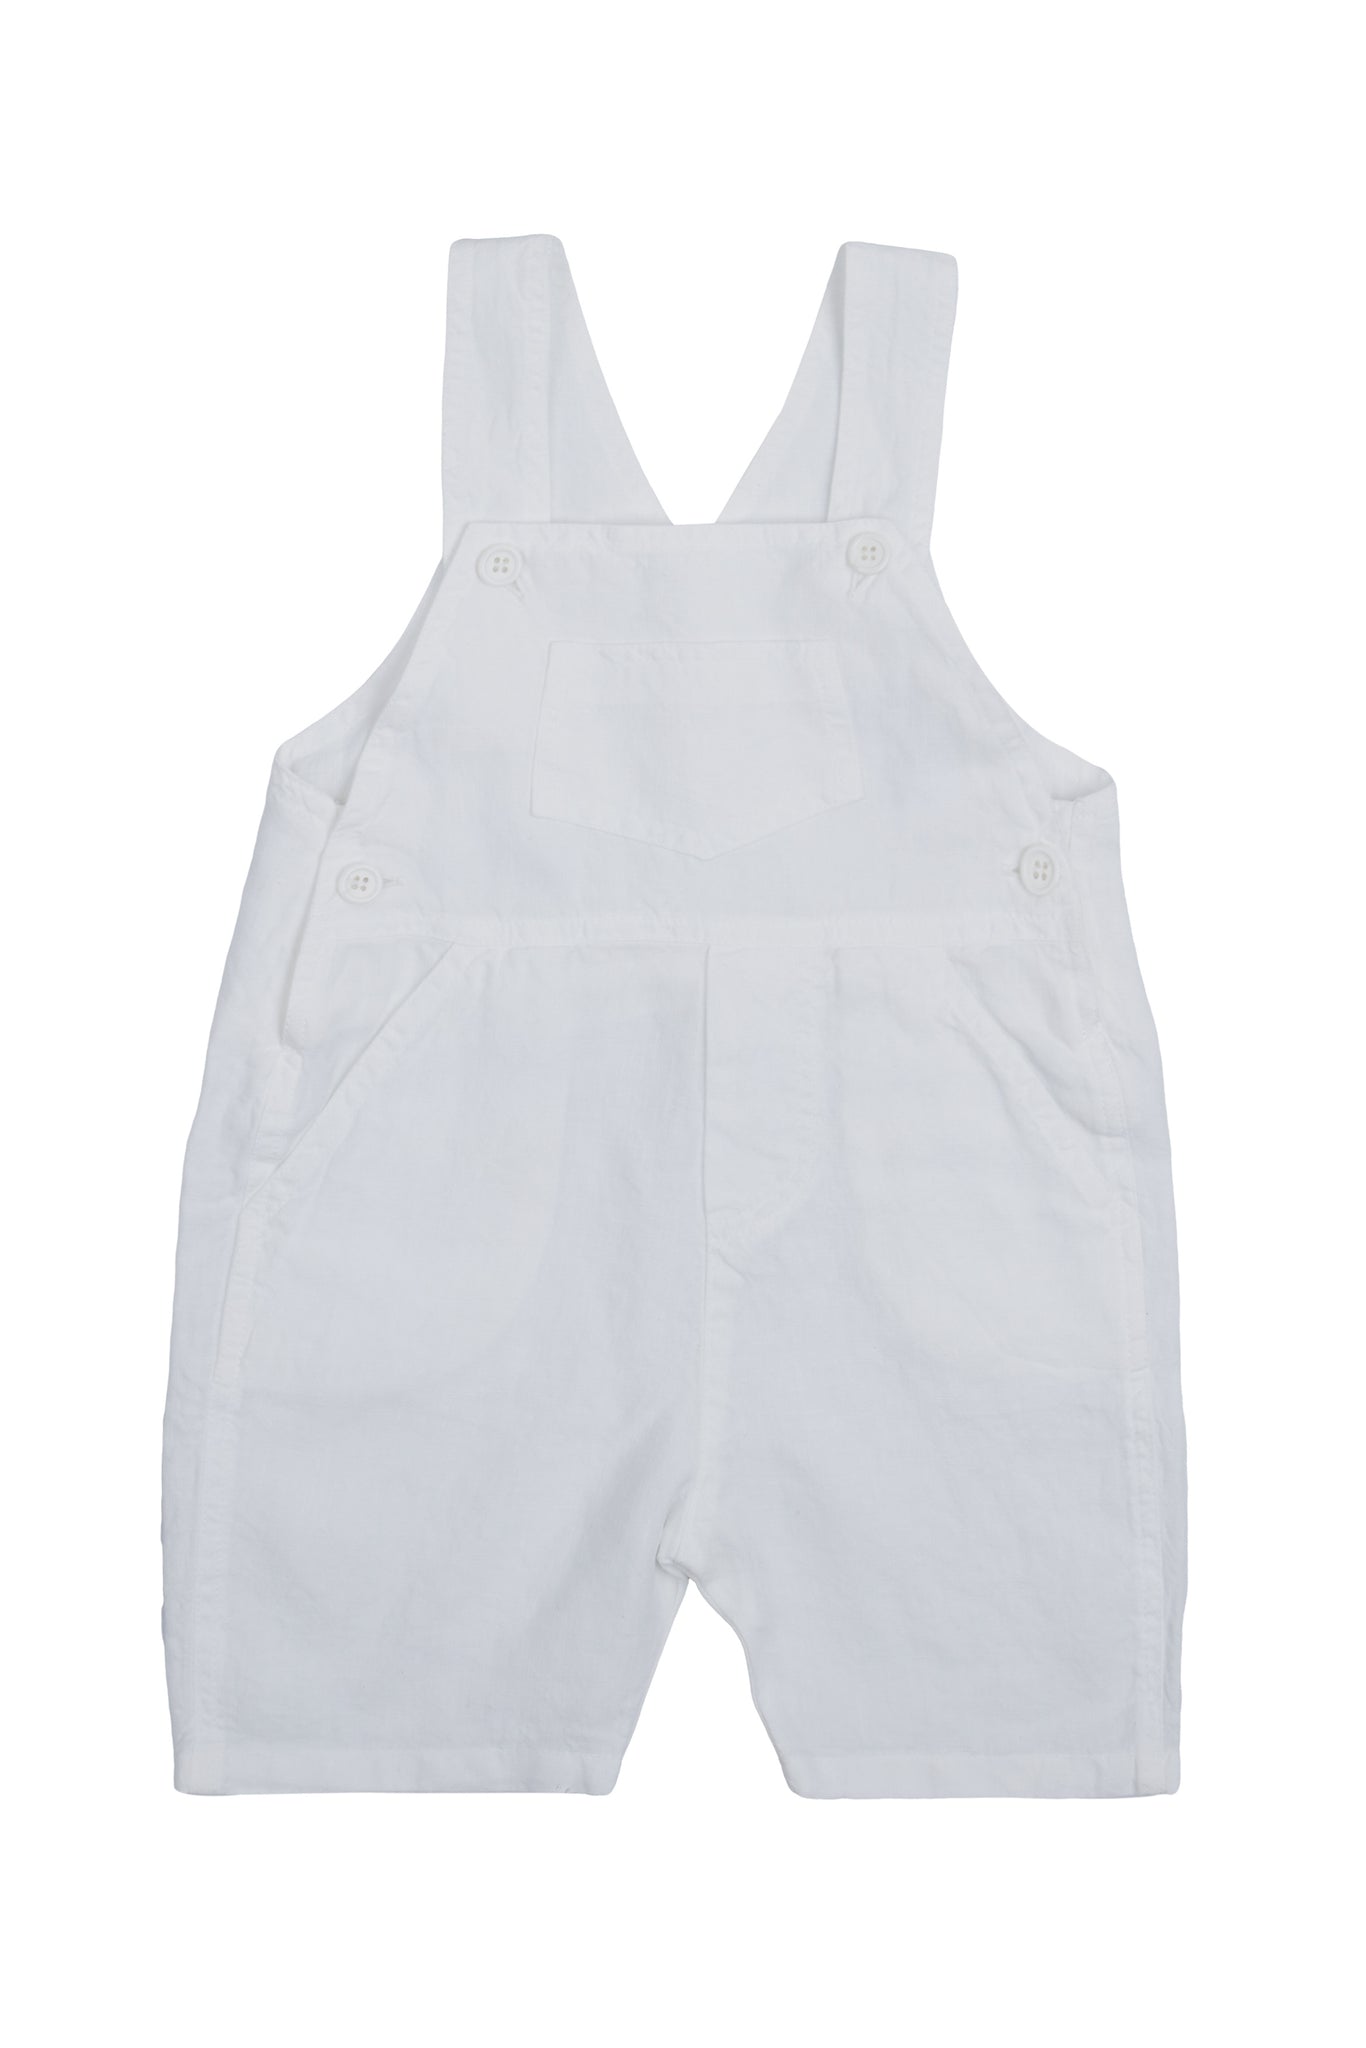 LINEN OVERALLS (yellow, white, beige, baby pink, strawberry, melon)